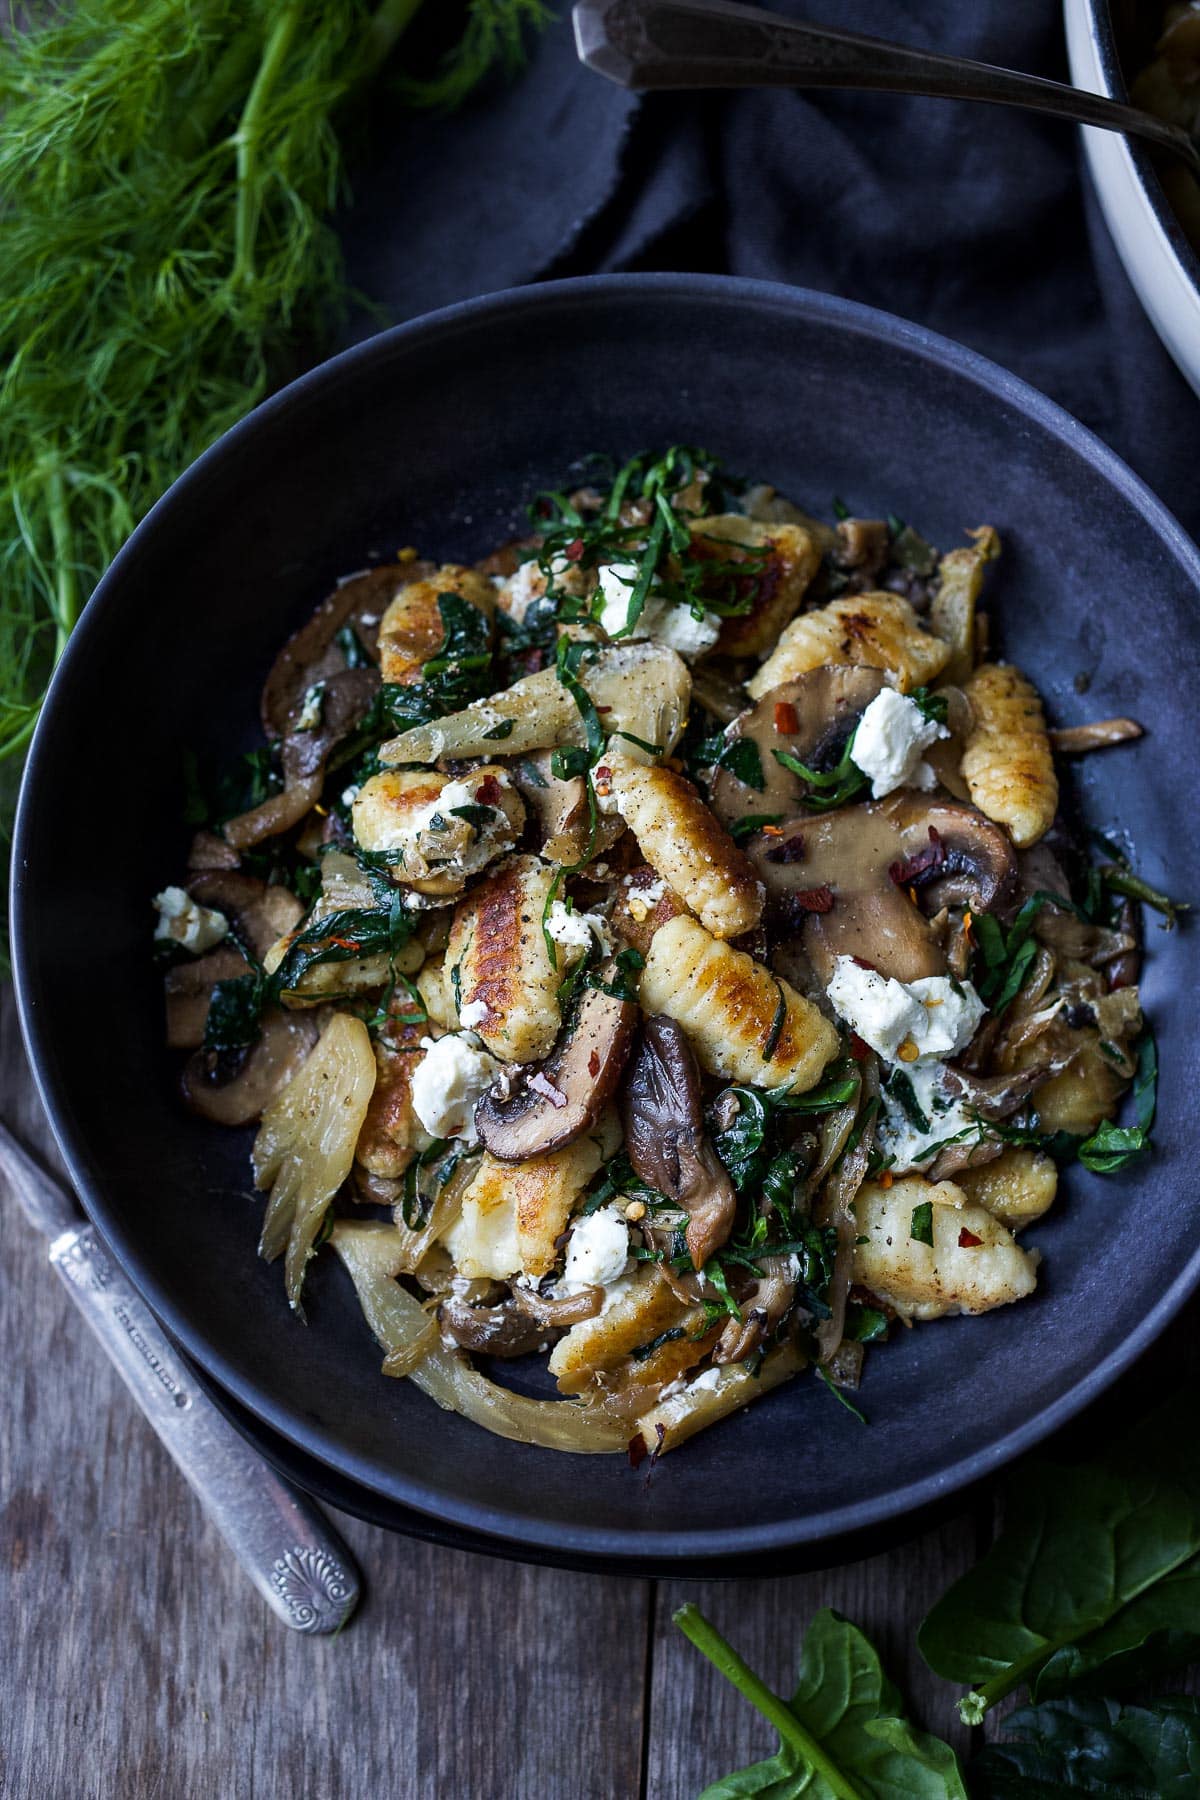 Best Mushroom Recipes: gnocchi with mushrooms and spinach 